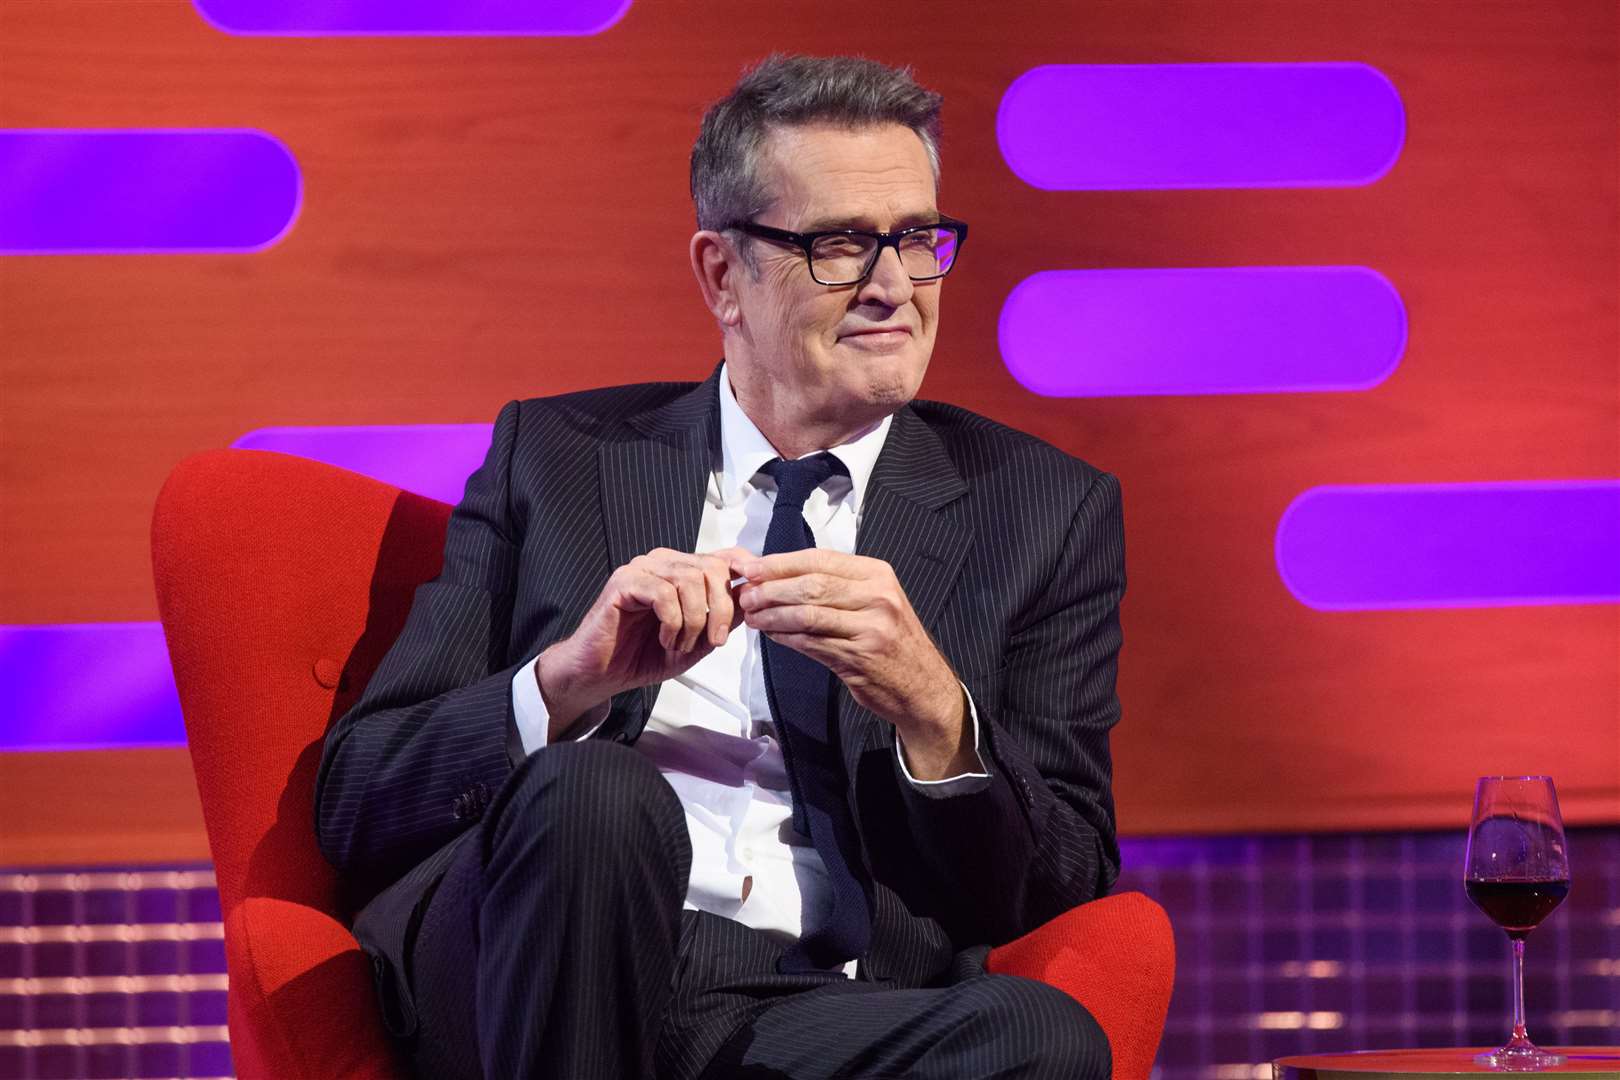 Rupert Everett said he was born ‘illegal’ because homosexuality was not legalised in the UK until 1967 (Matt Crossick/PA)